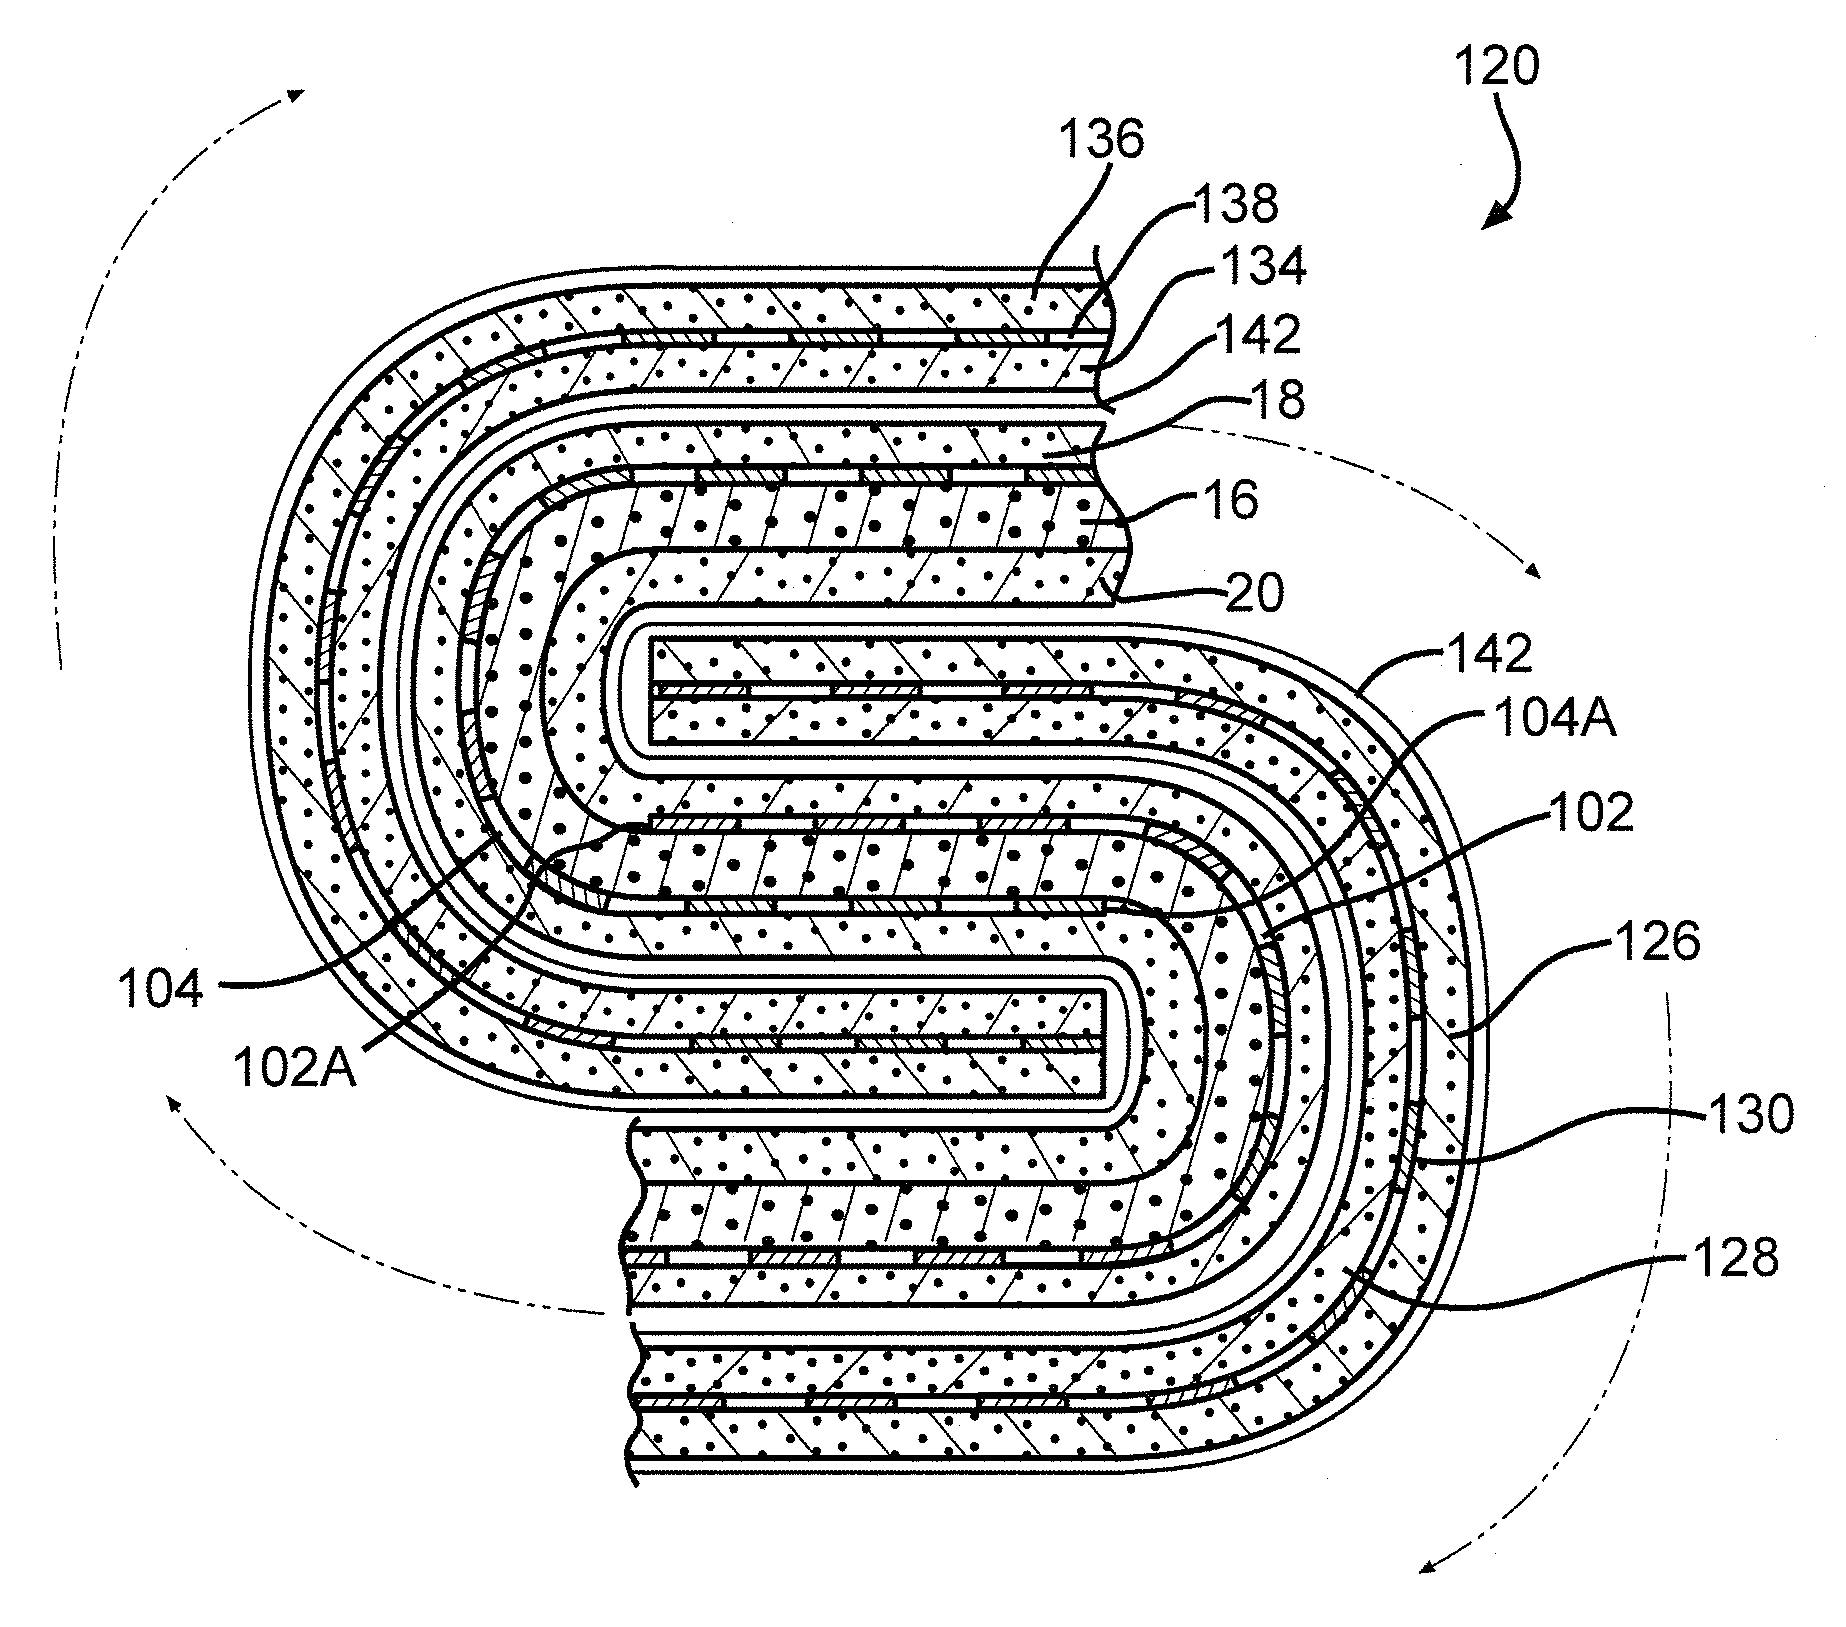 Sandwich Cathode Electrochemical Cell With Wound Electrode Assembly